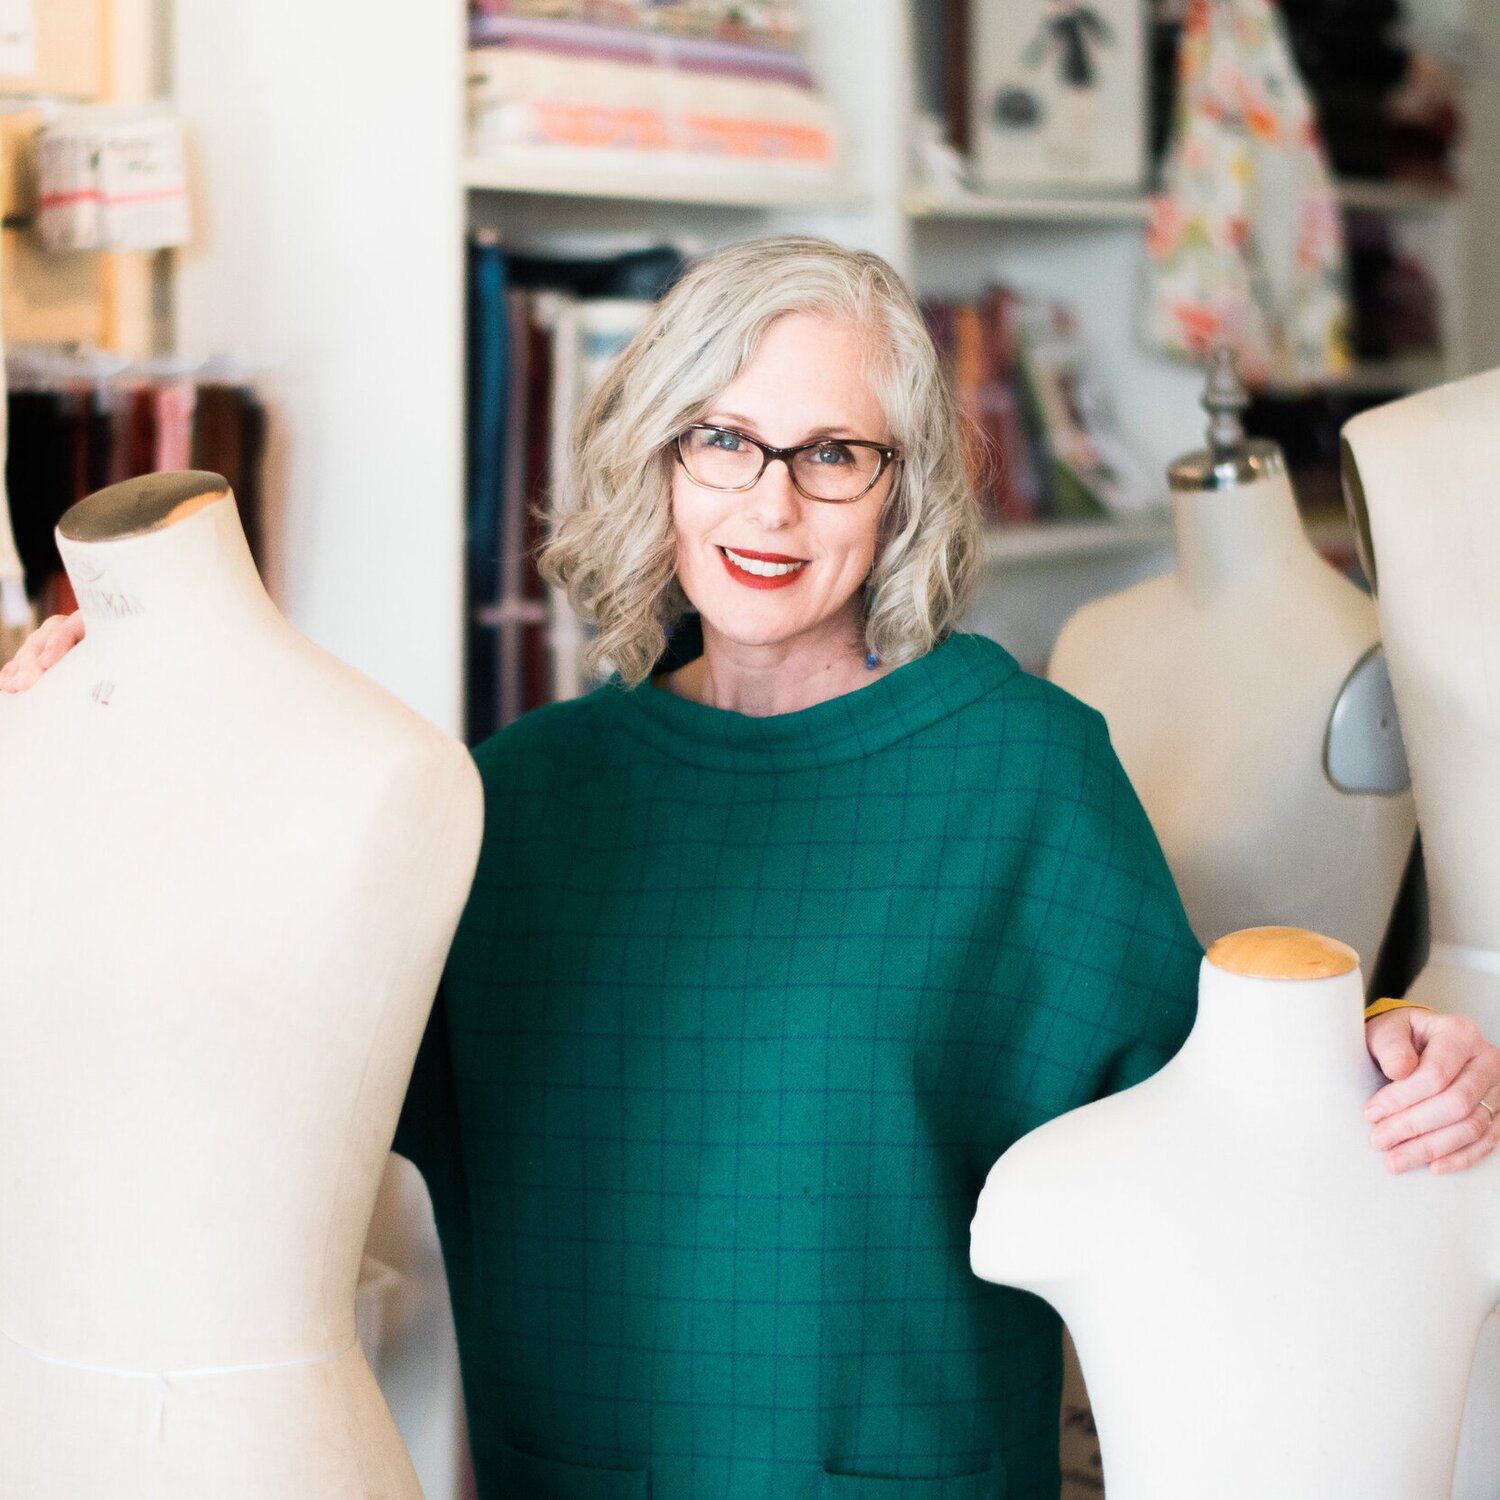 The Sewing Room - An accelerated Fashion Program for Middle and High ...